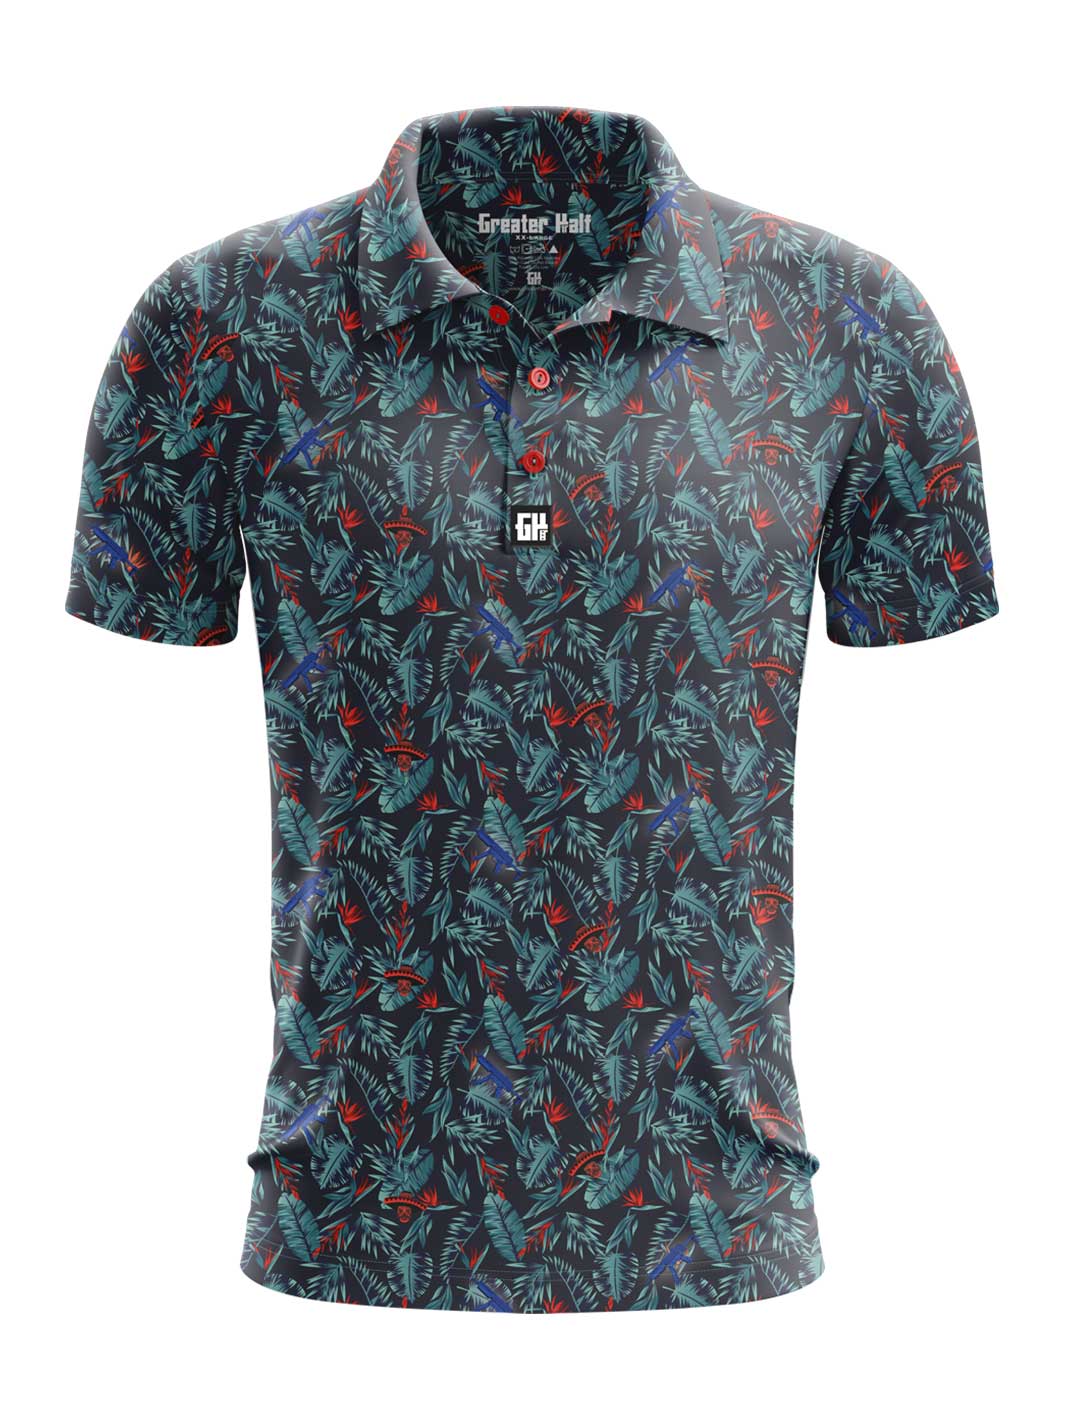 MP Tropic Inferno - Performance Polo - Greater Half